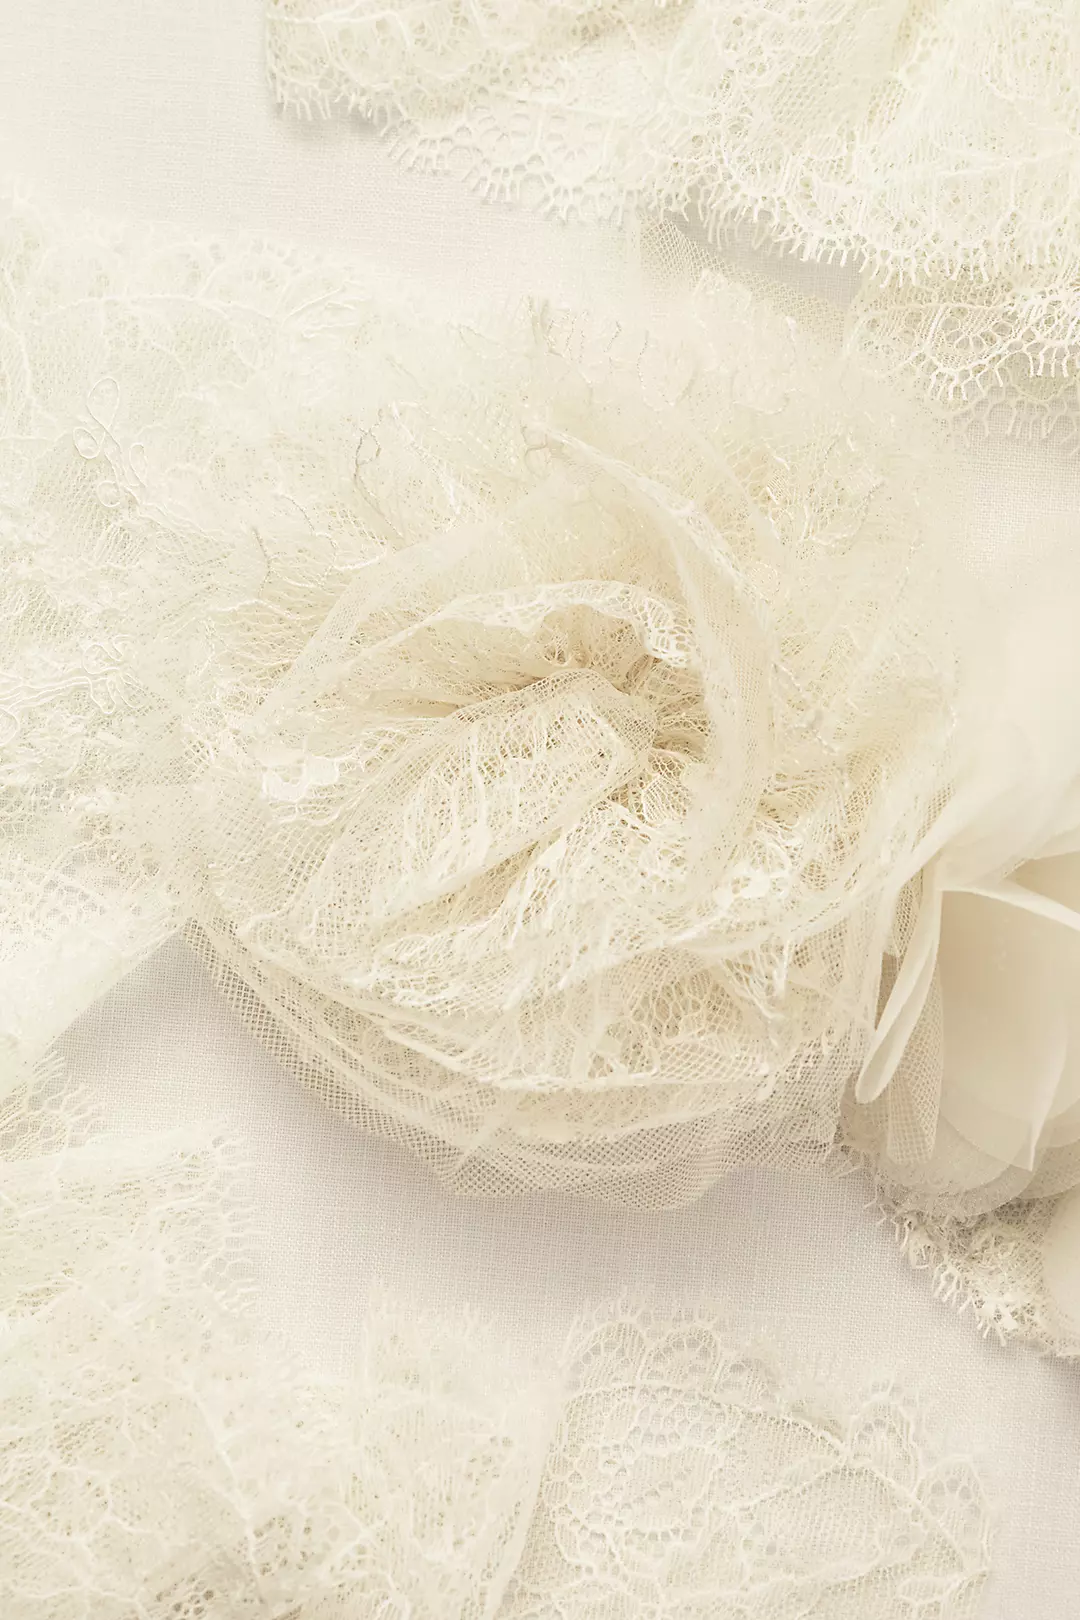 Lace Sash with 3D Organza Flower Image 2